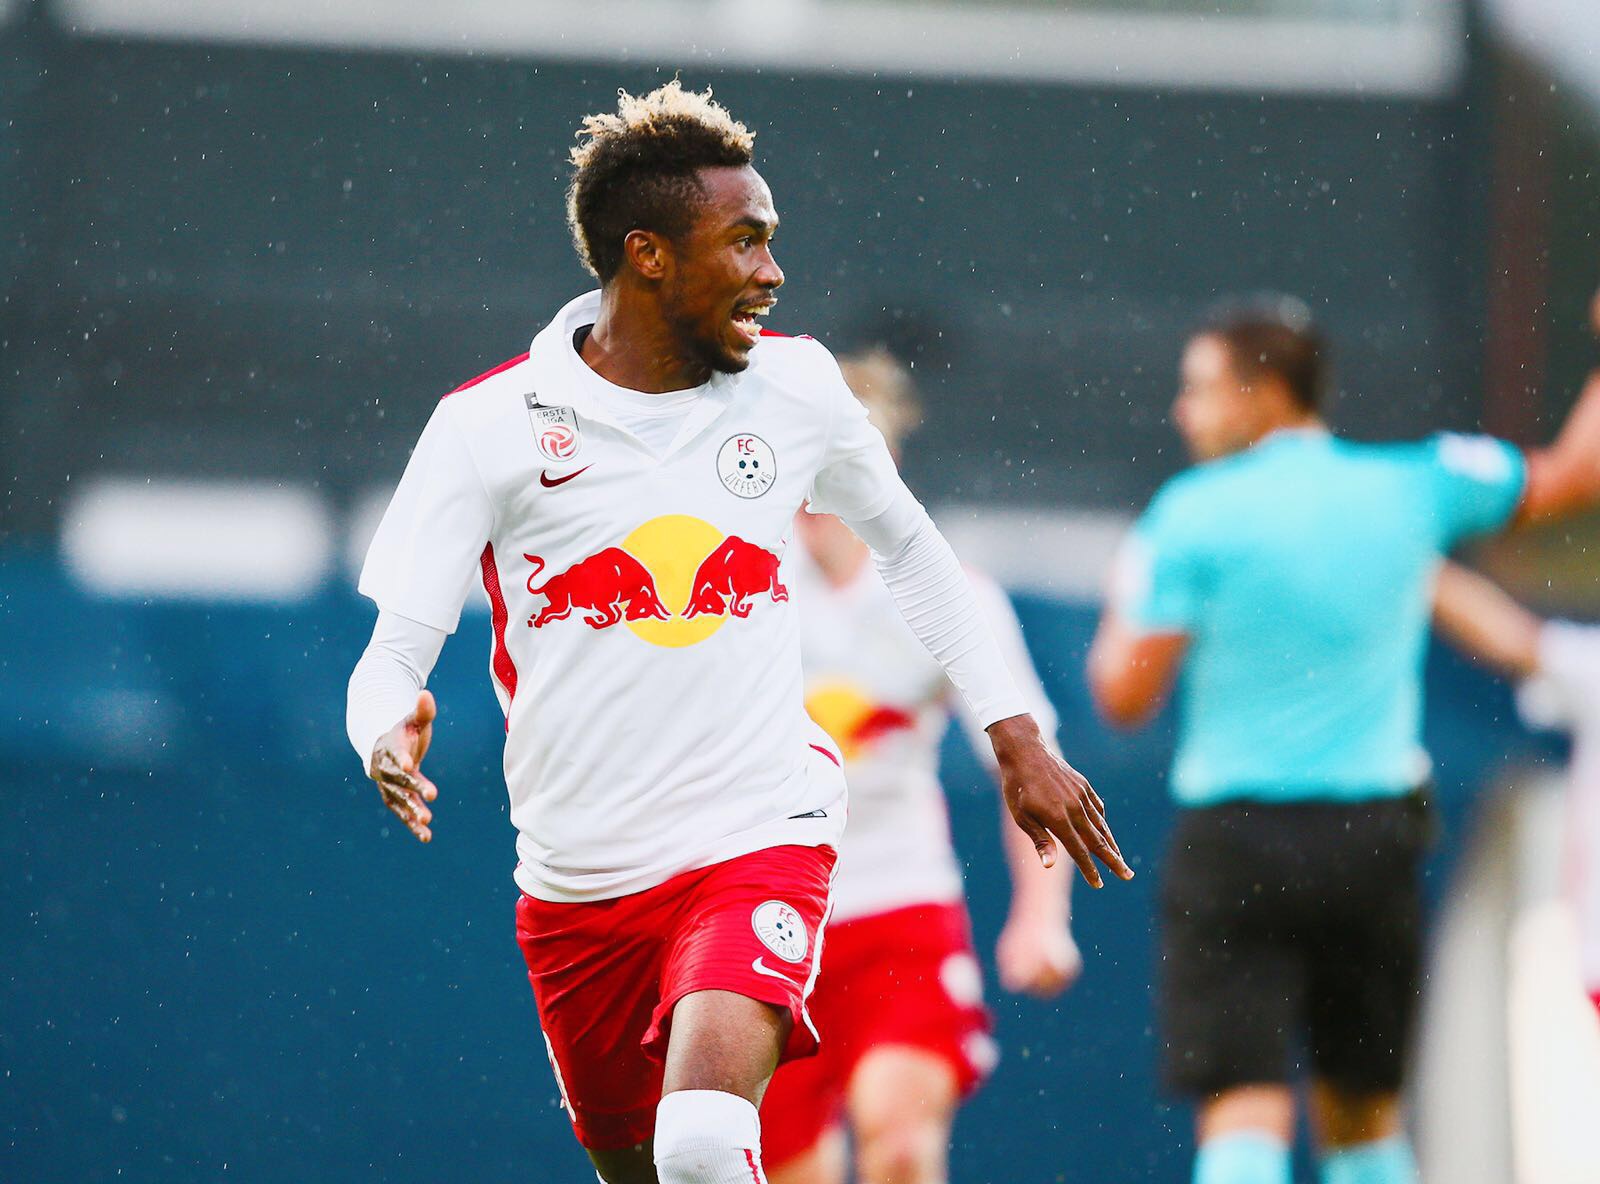 Samuel Tetteh played in Liefering goalless draw with Wattens